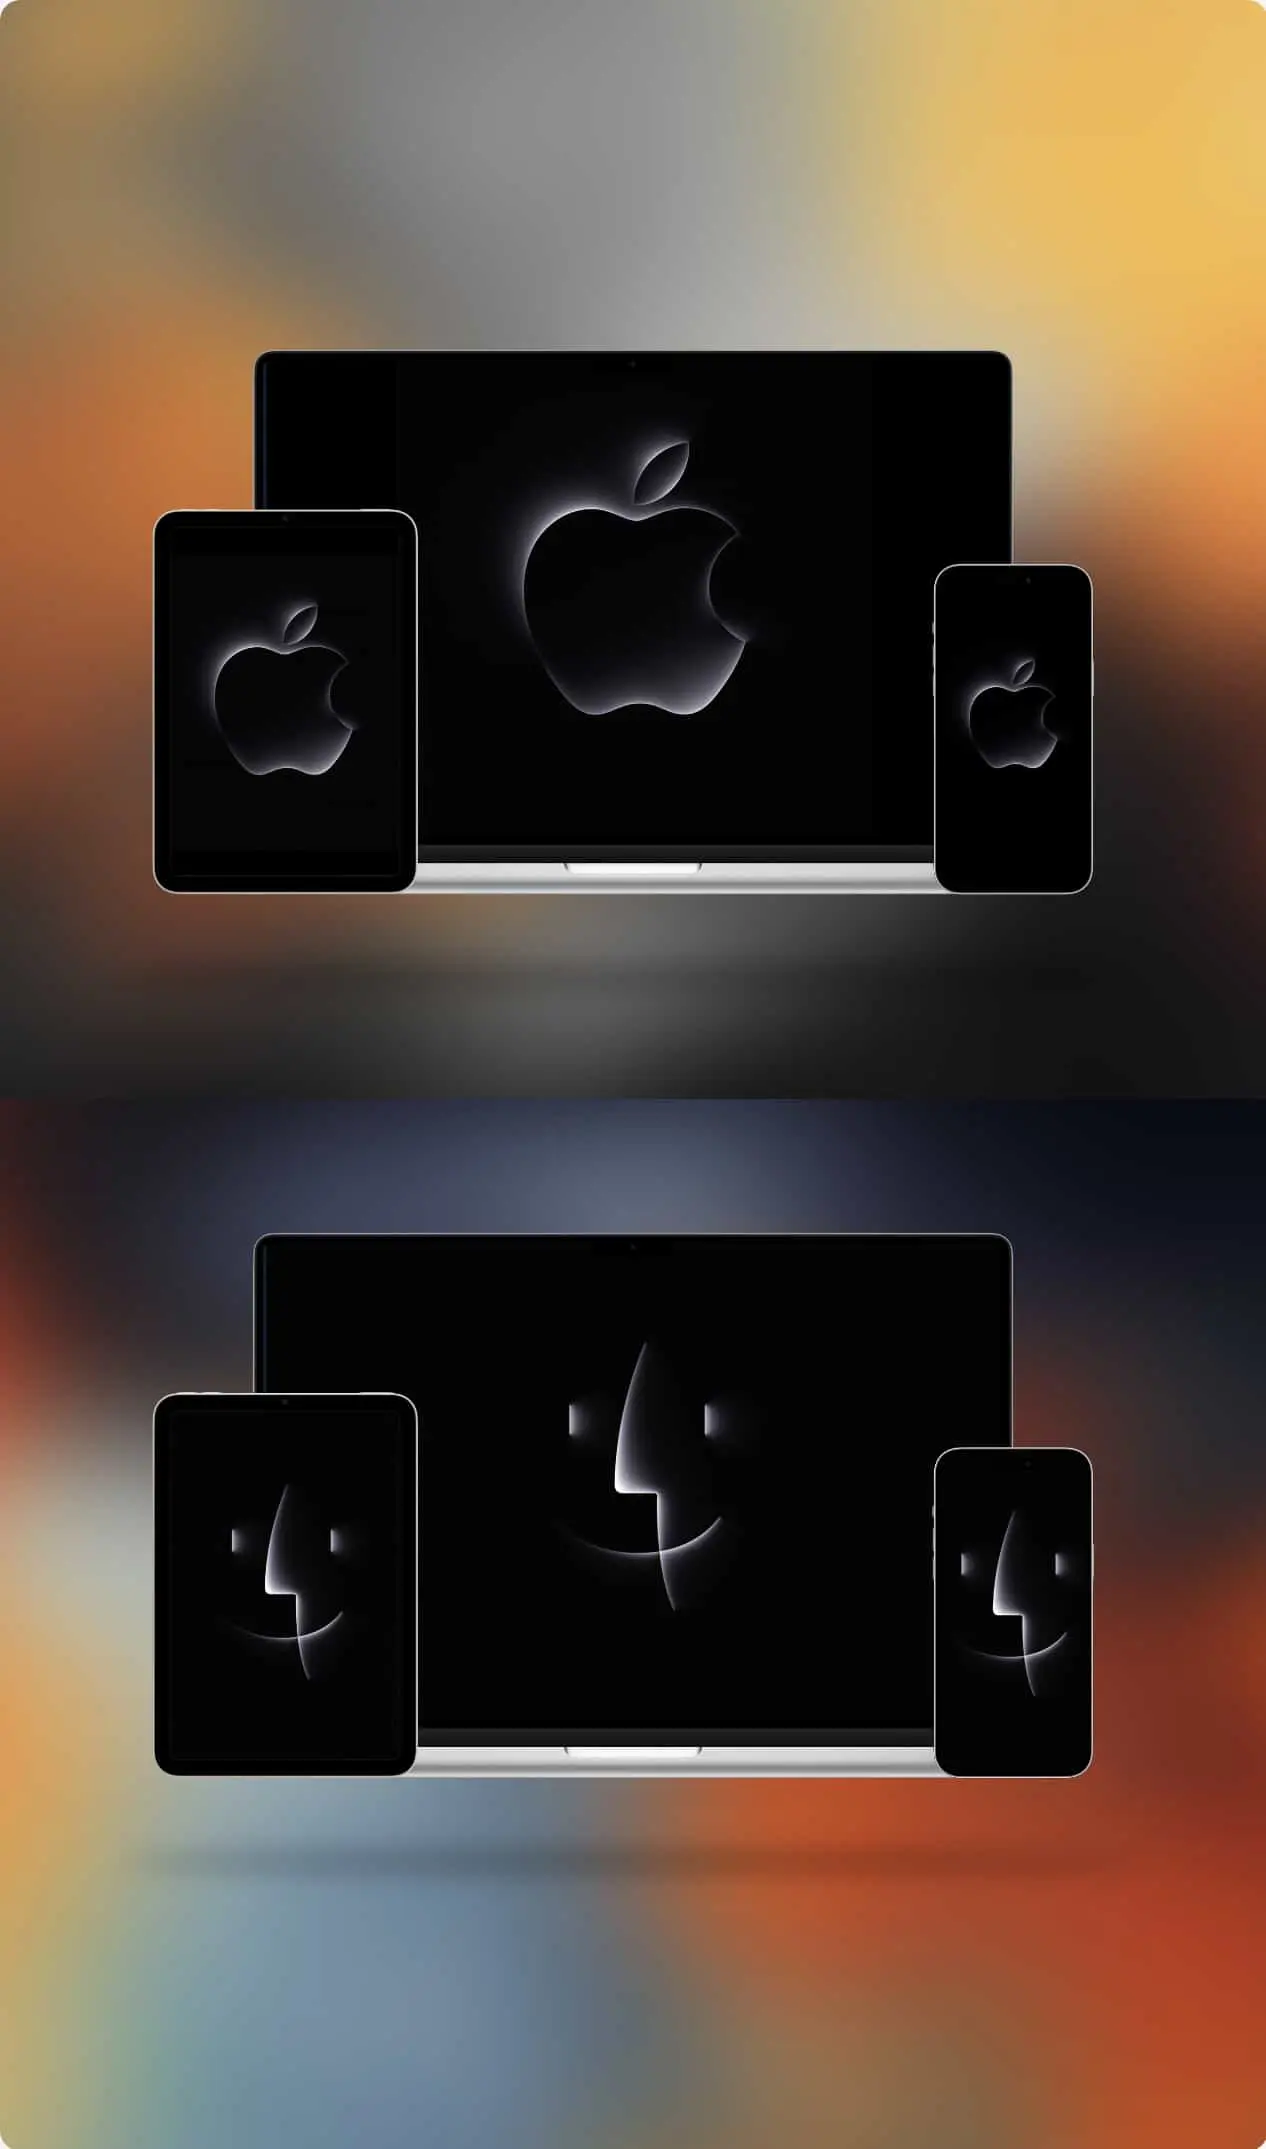 SCARY FAST APPLE EVENT LOGO & SCARY FAST FINDER